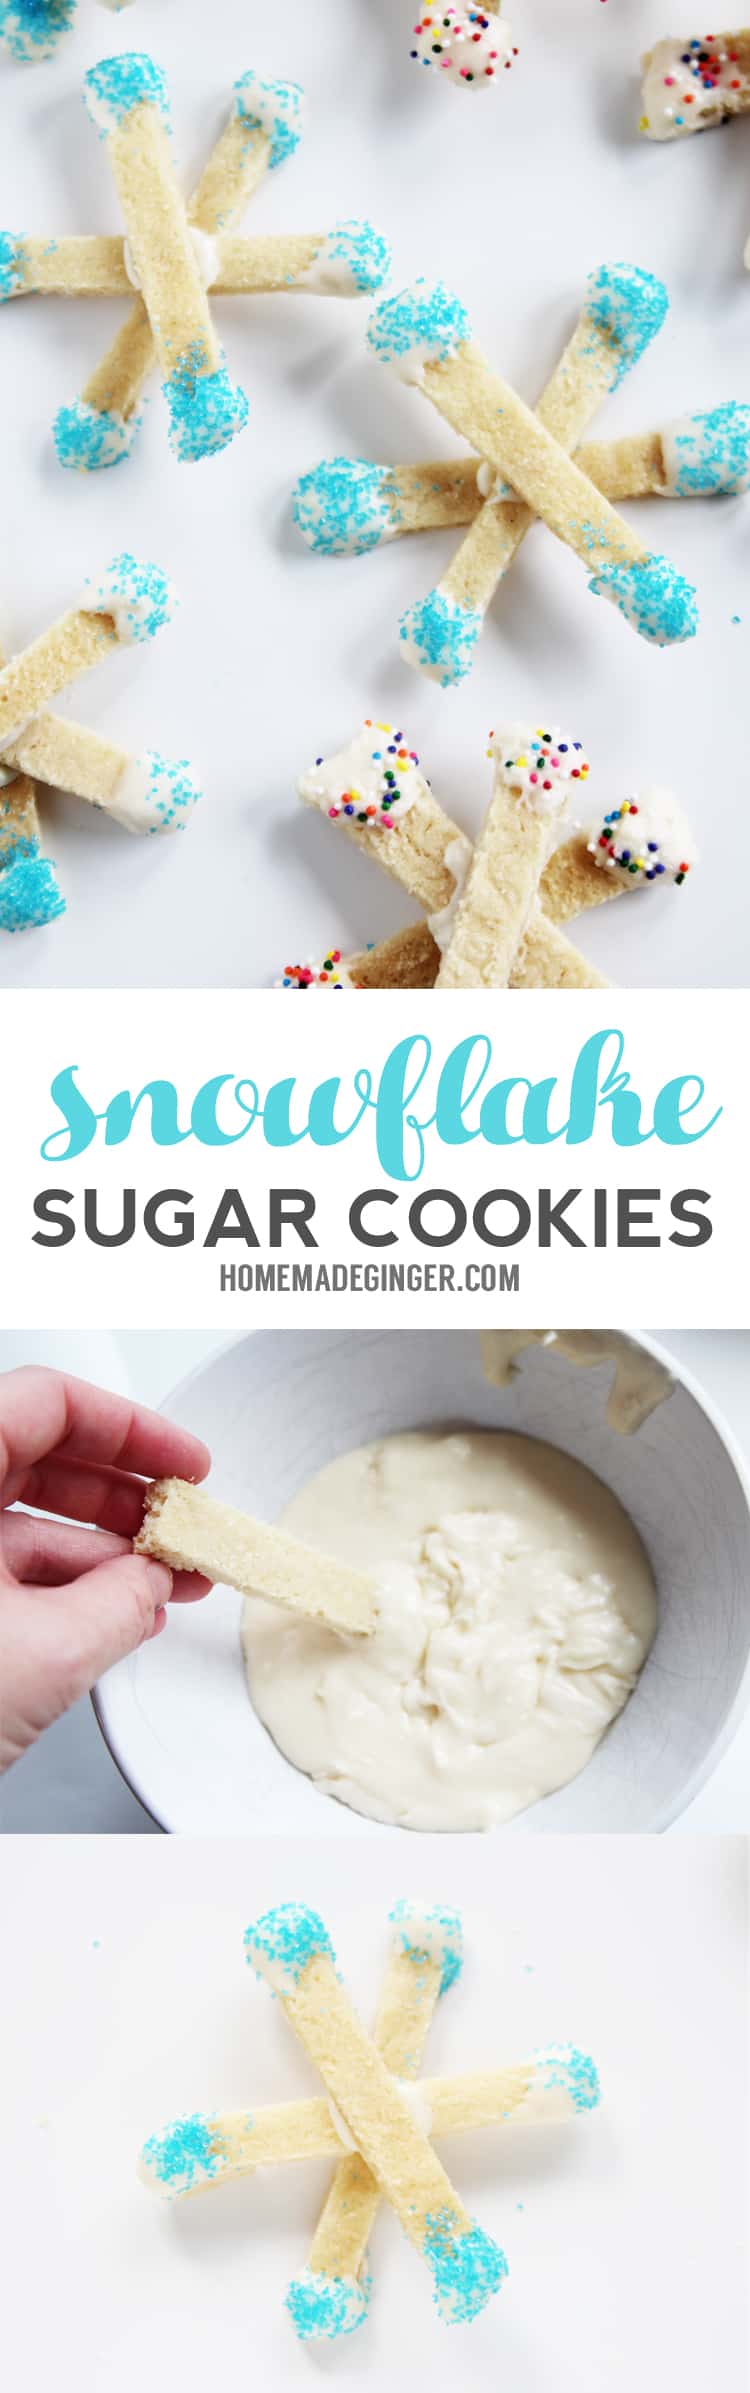 These snowflake cookies are SO EASY to make and the perfect edible snowflake craft for kids to make!